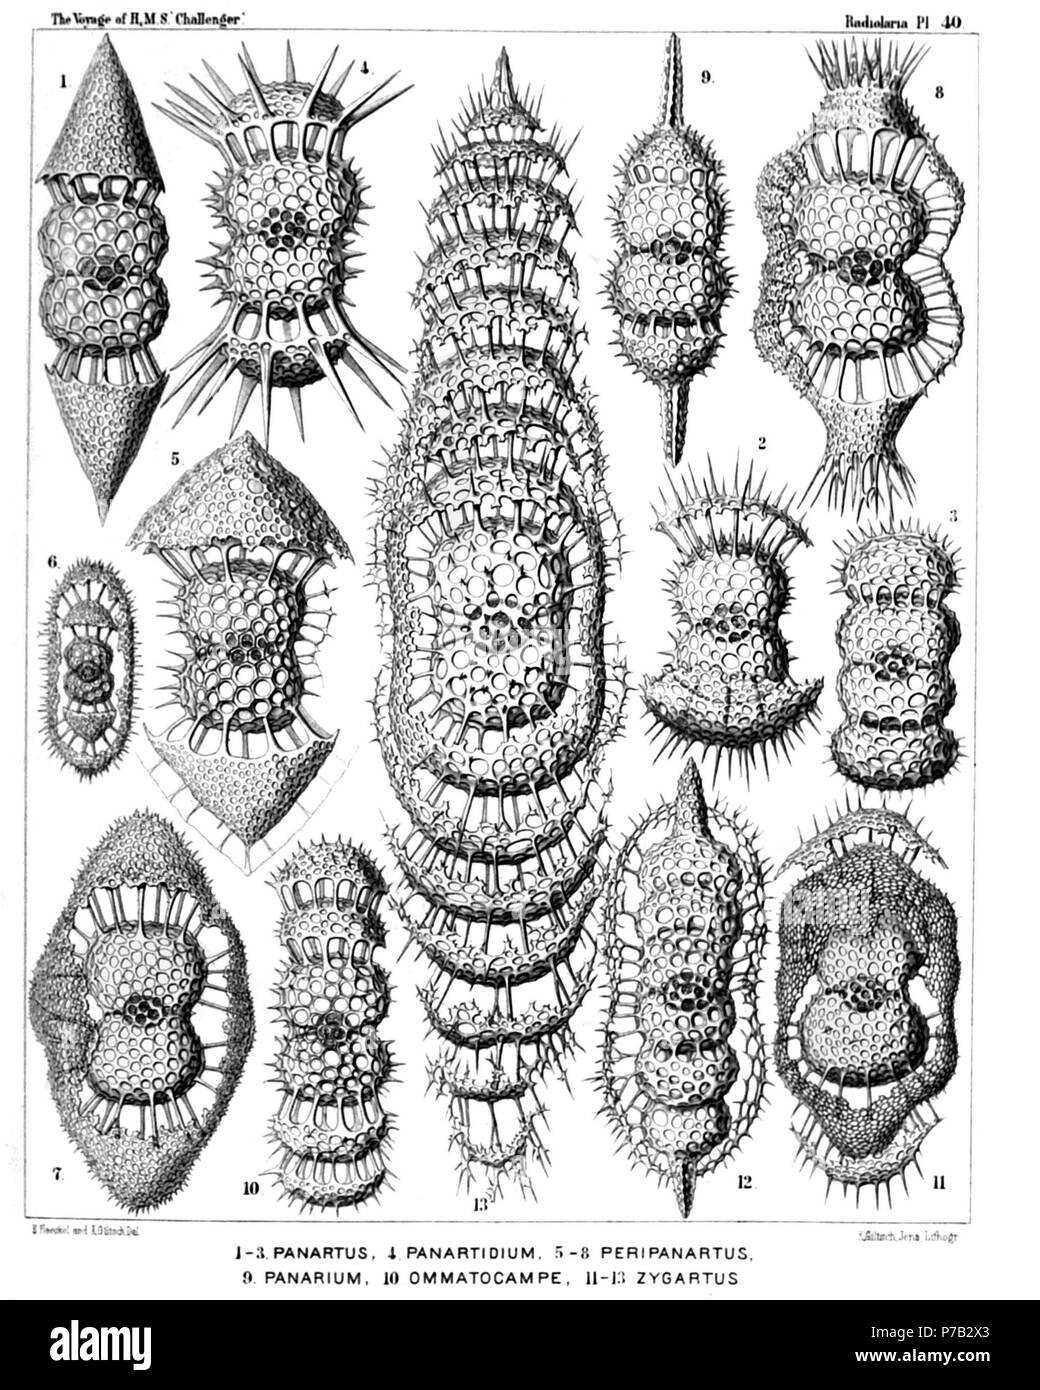 English: Illustration from Report on the Radiolaria collected by H.M.S. Challenger during the years 1873-1876. Part III. Original description follows:  Plate 40. Panartida et Zygartida.  Diam.  Fig. 1. Panartus diploconus, n. sp., × 300  Fig. 2. Panartus pluteus, n. sp., × 300  Fig. 3. Panartus tetrathalamus, n. sp., × 300  Fig. 4. Panicium coronatum, n. sp. (vel Panartidium coronatum), × 300  Fig. 5. Peripanartus amphiconus, n. sp., × 300  Fig. 6. Peripanartus cylindrus, n. sp., × 150  Fig. 7. Peripanartus atractus, n. sp., × 300  Fig. 8. Peripanicium amphicorona, n. sp., × 300  Fig. 9. Panar Stock Photo